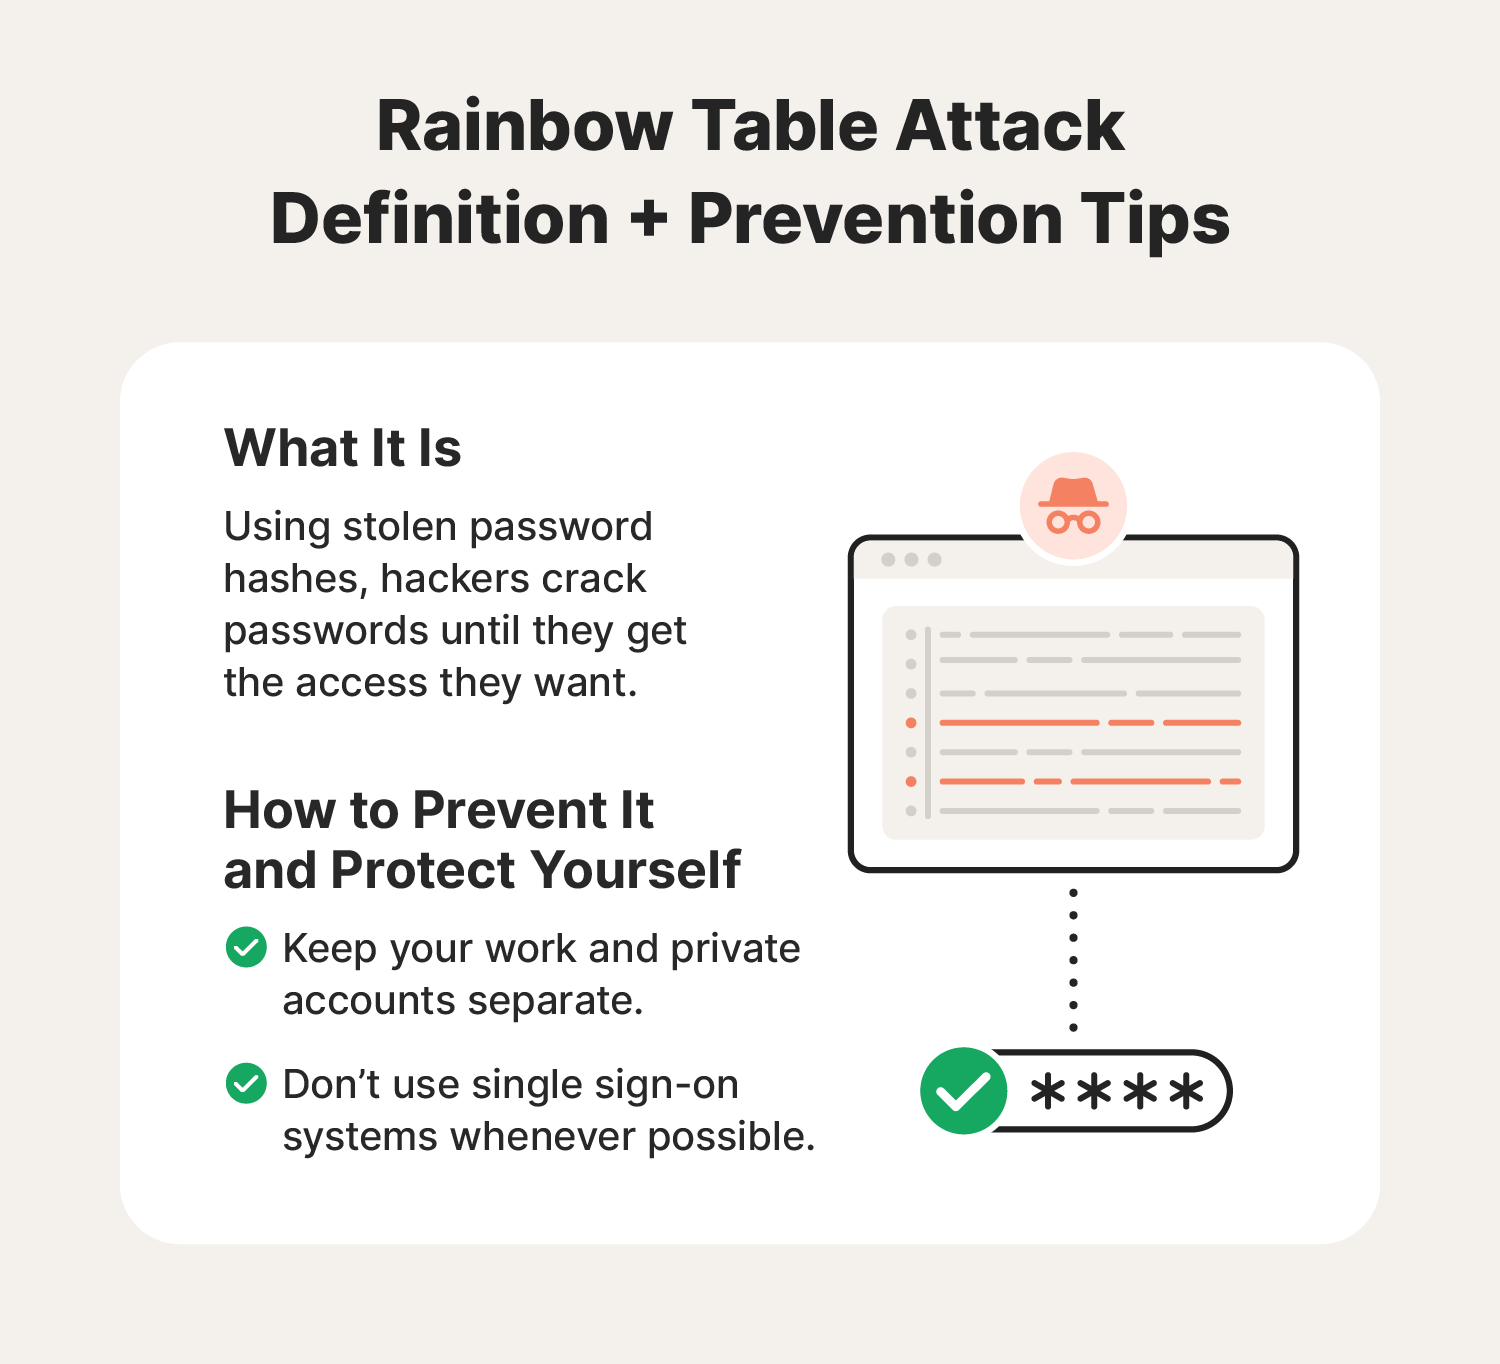 Illustrated chart defining the brute force attack method called a rainbow table attack with prevention and protection tips.